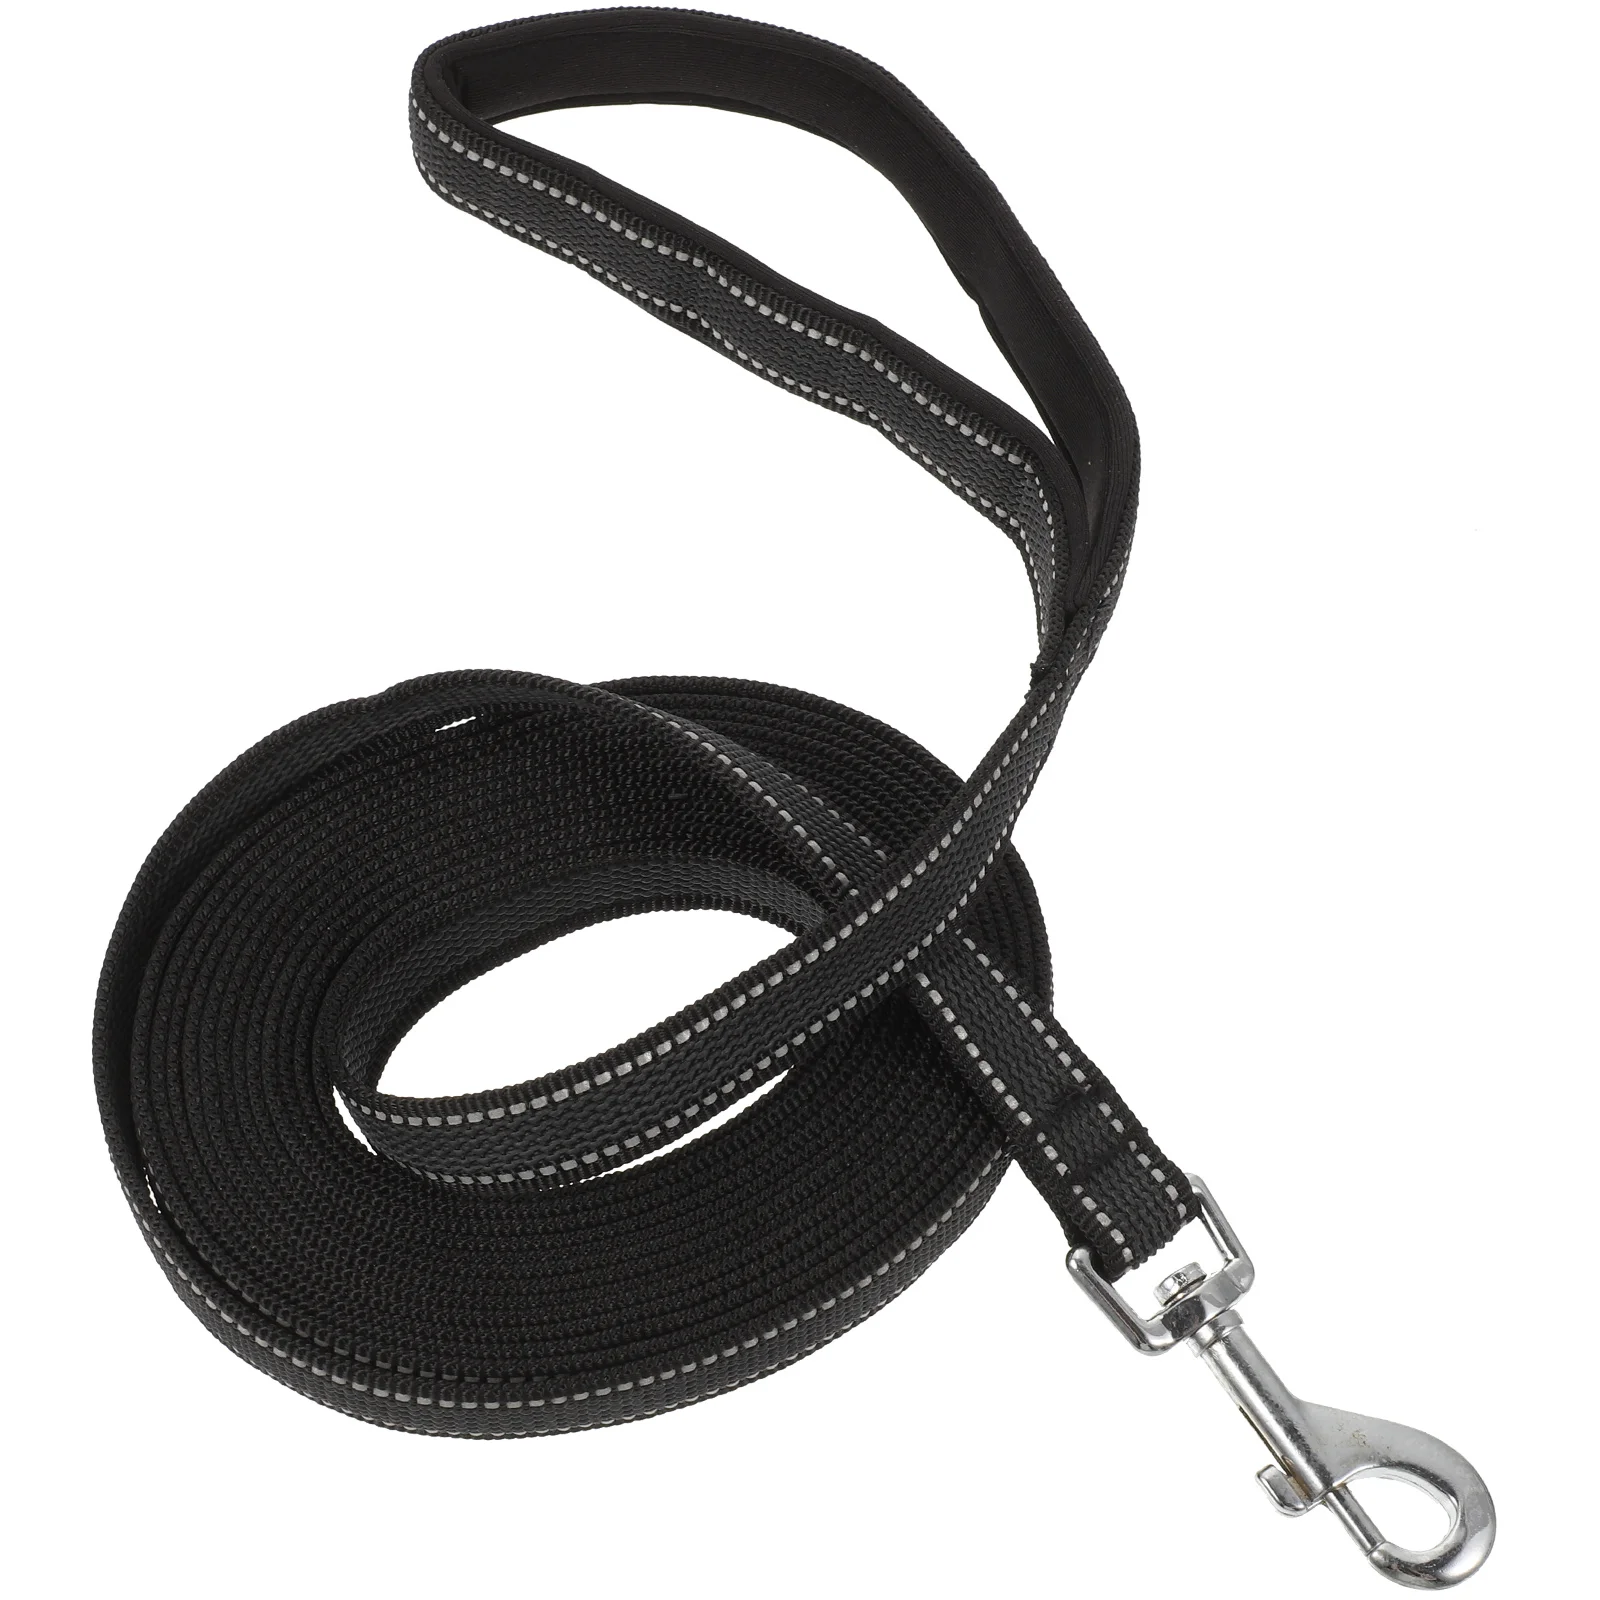 

Dog Leash Rope Leashes Walking Outdoor Pet Training Traction Horses Line Dogs Led Supply Out Tie Ropes Cable Pulling No Heavy